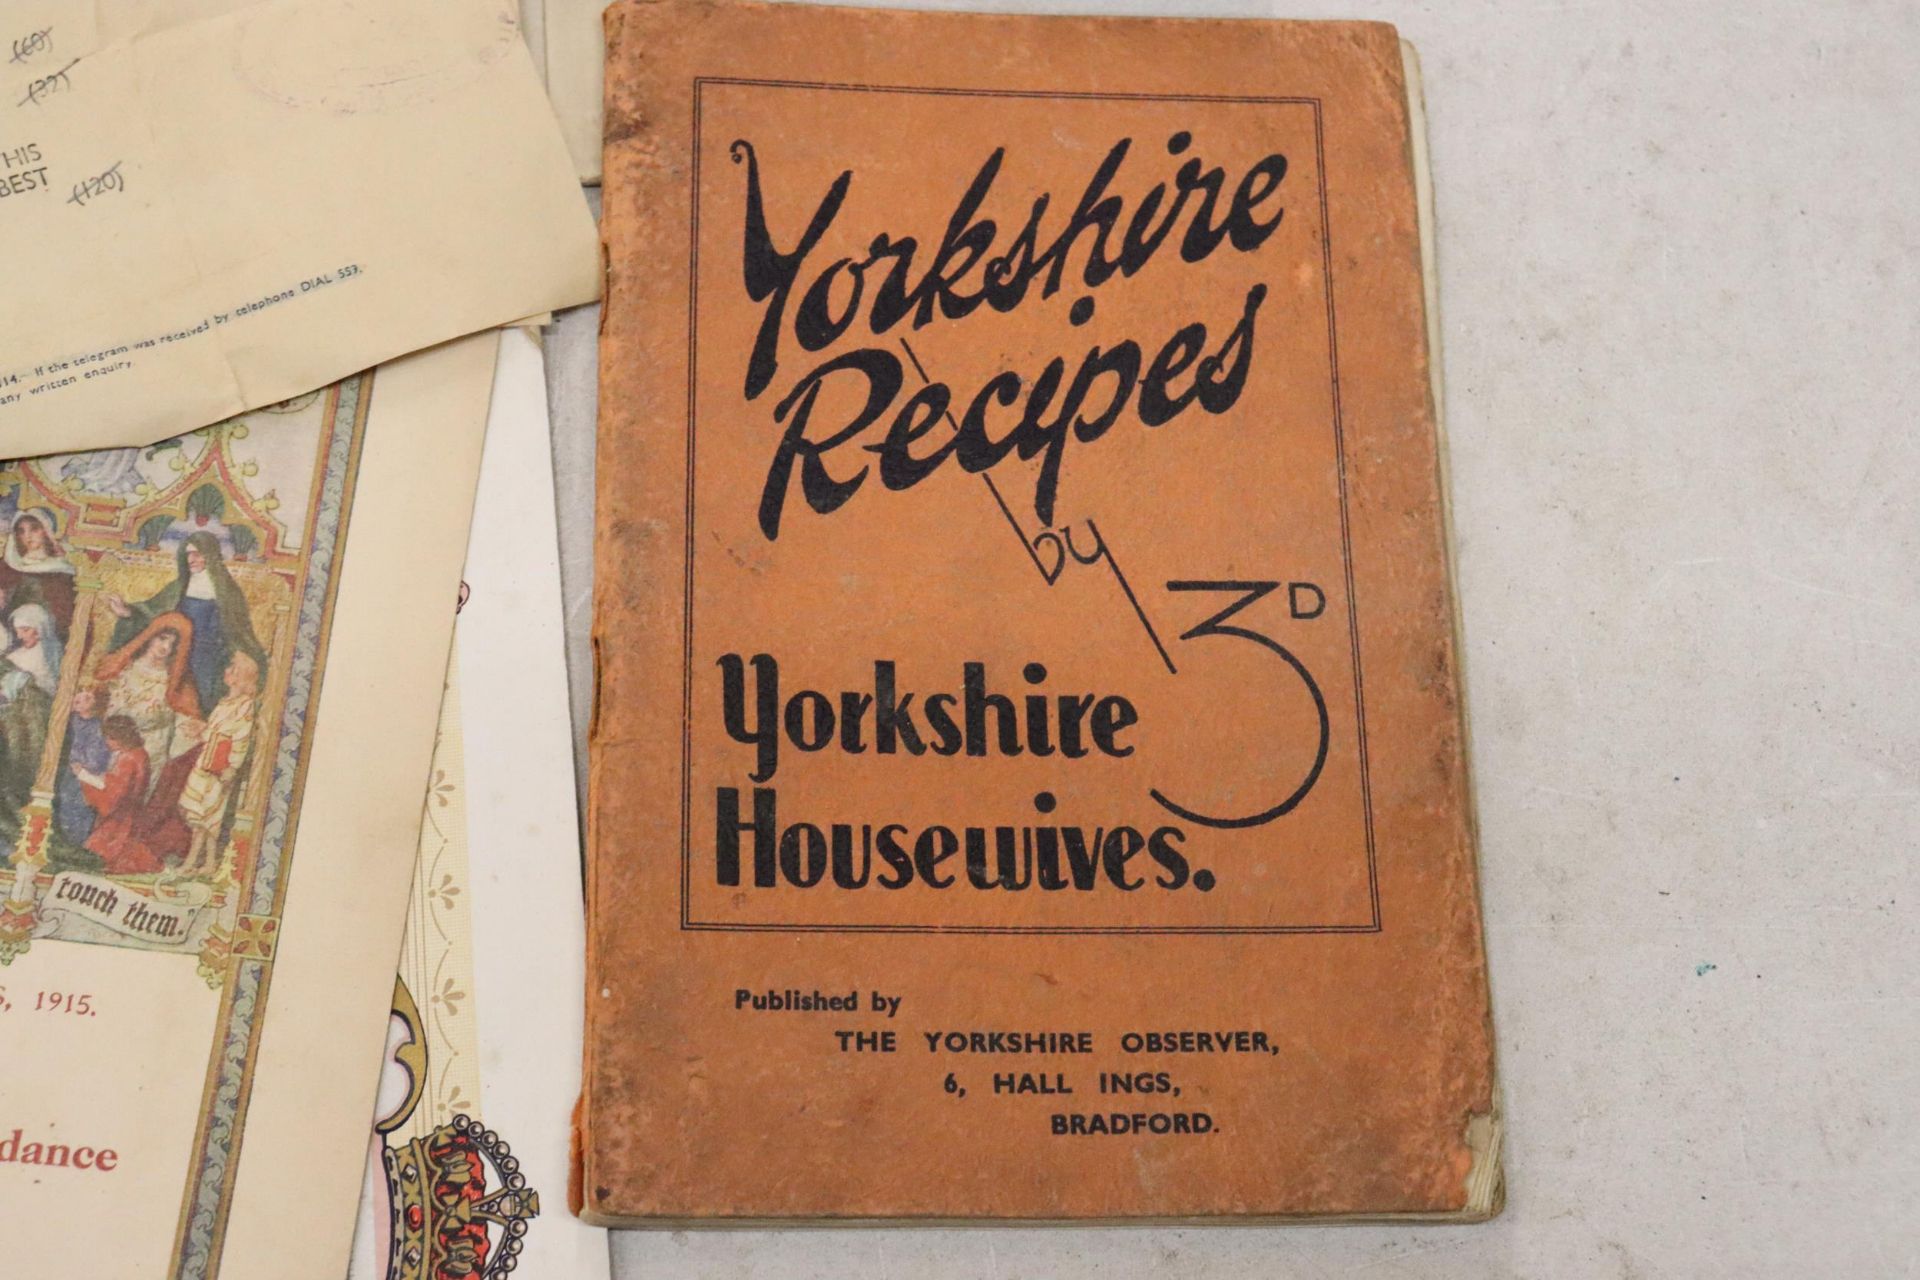 A COLLECTION OF MIXED EPHEMERA TO INCLUDE YORKSHIRE RECIPES BY YORKSHIRE HOUSEWIVES, OVERSEAS - Bild 3 aus 8